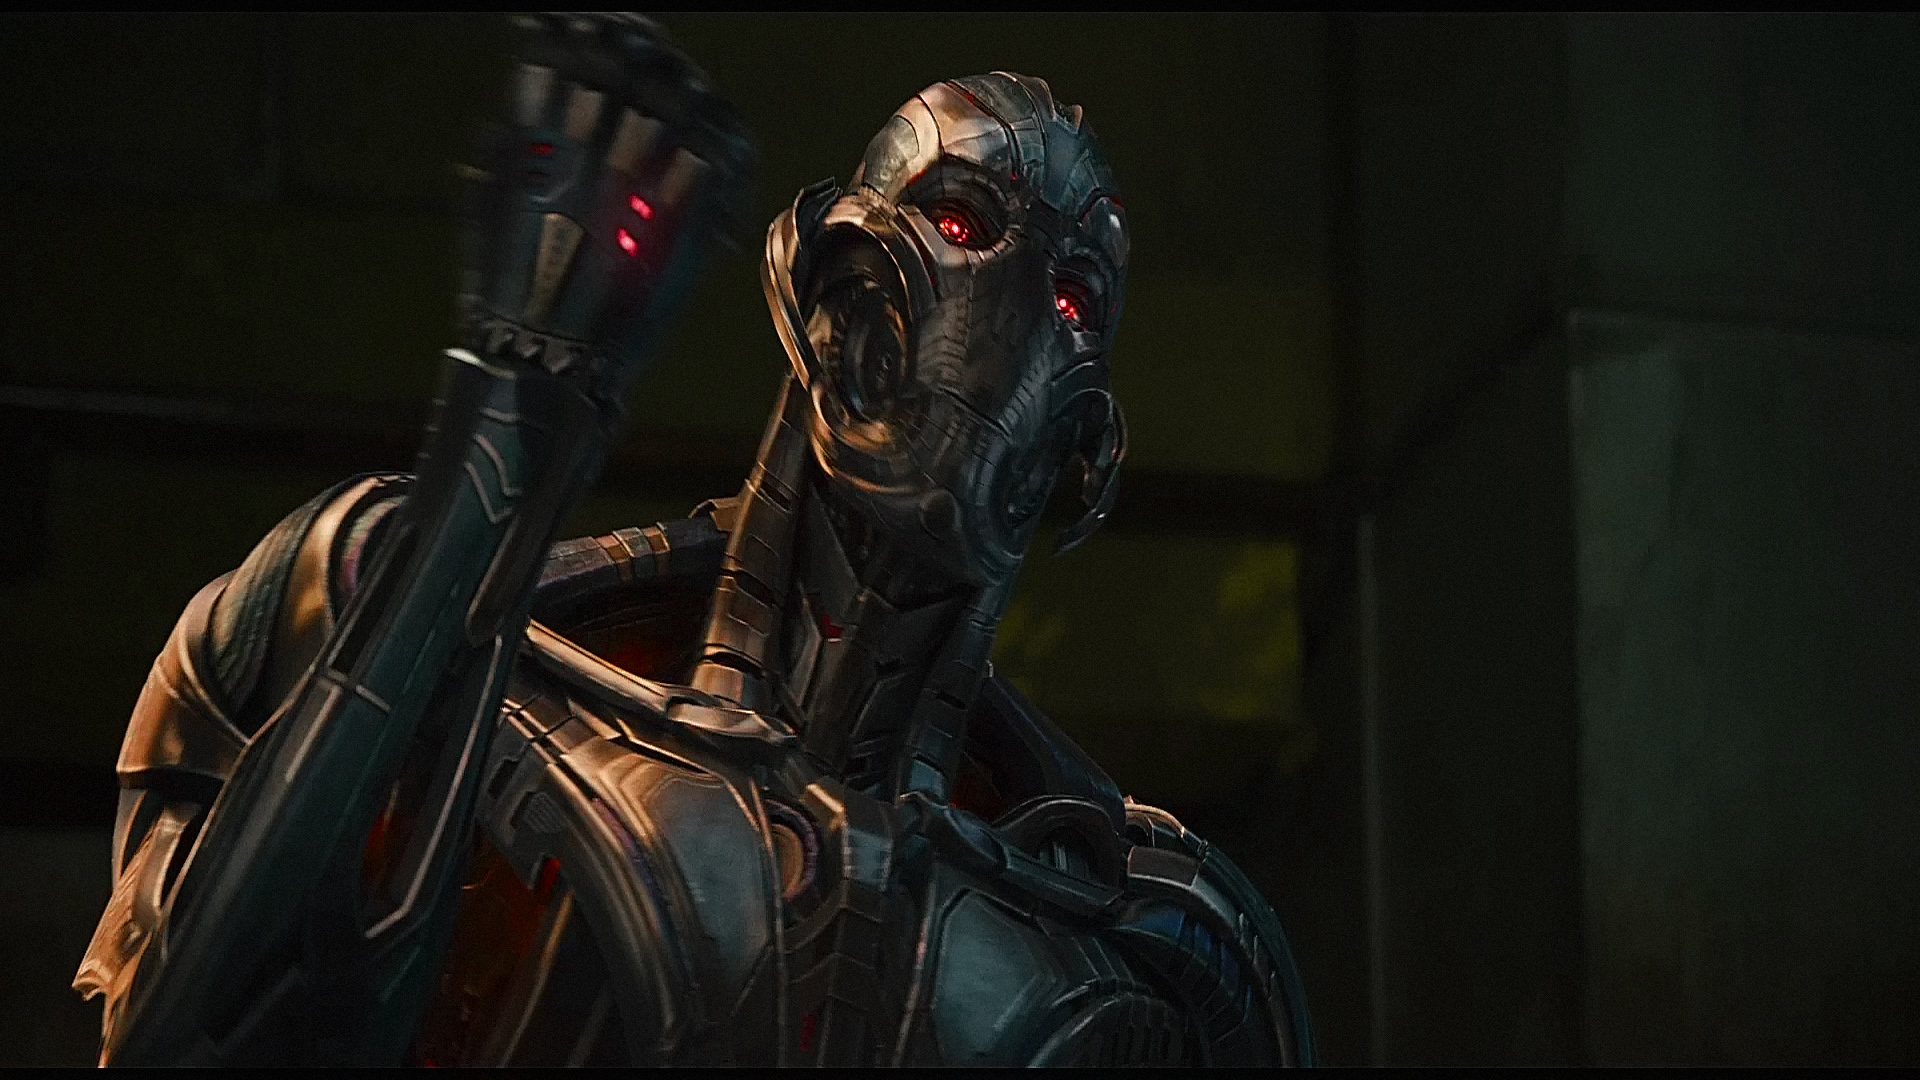 Age Of Ultron wallpapers 1920x1080 Movie Wallpapers